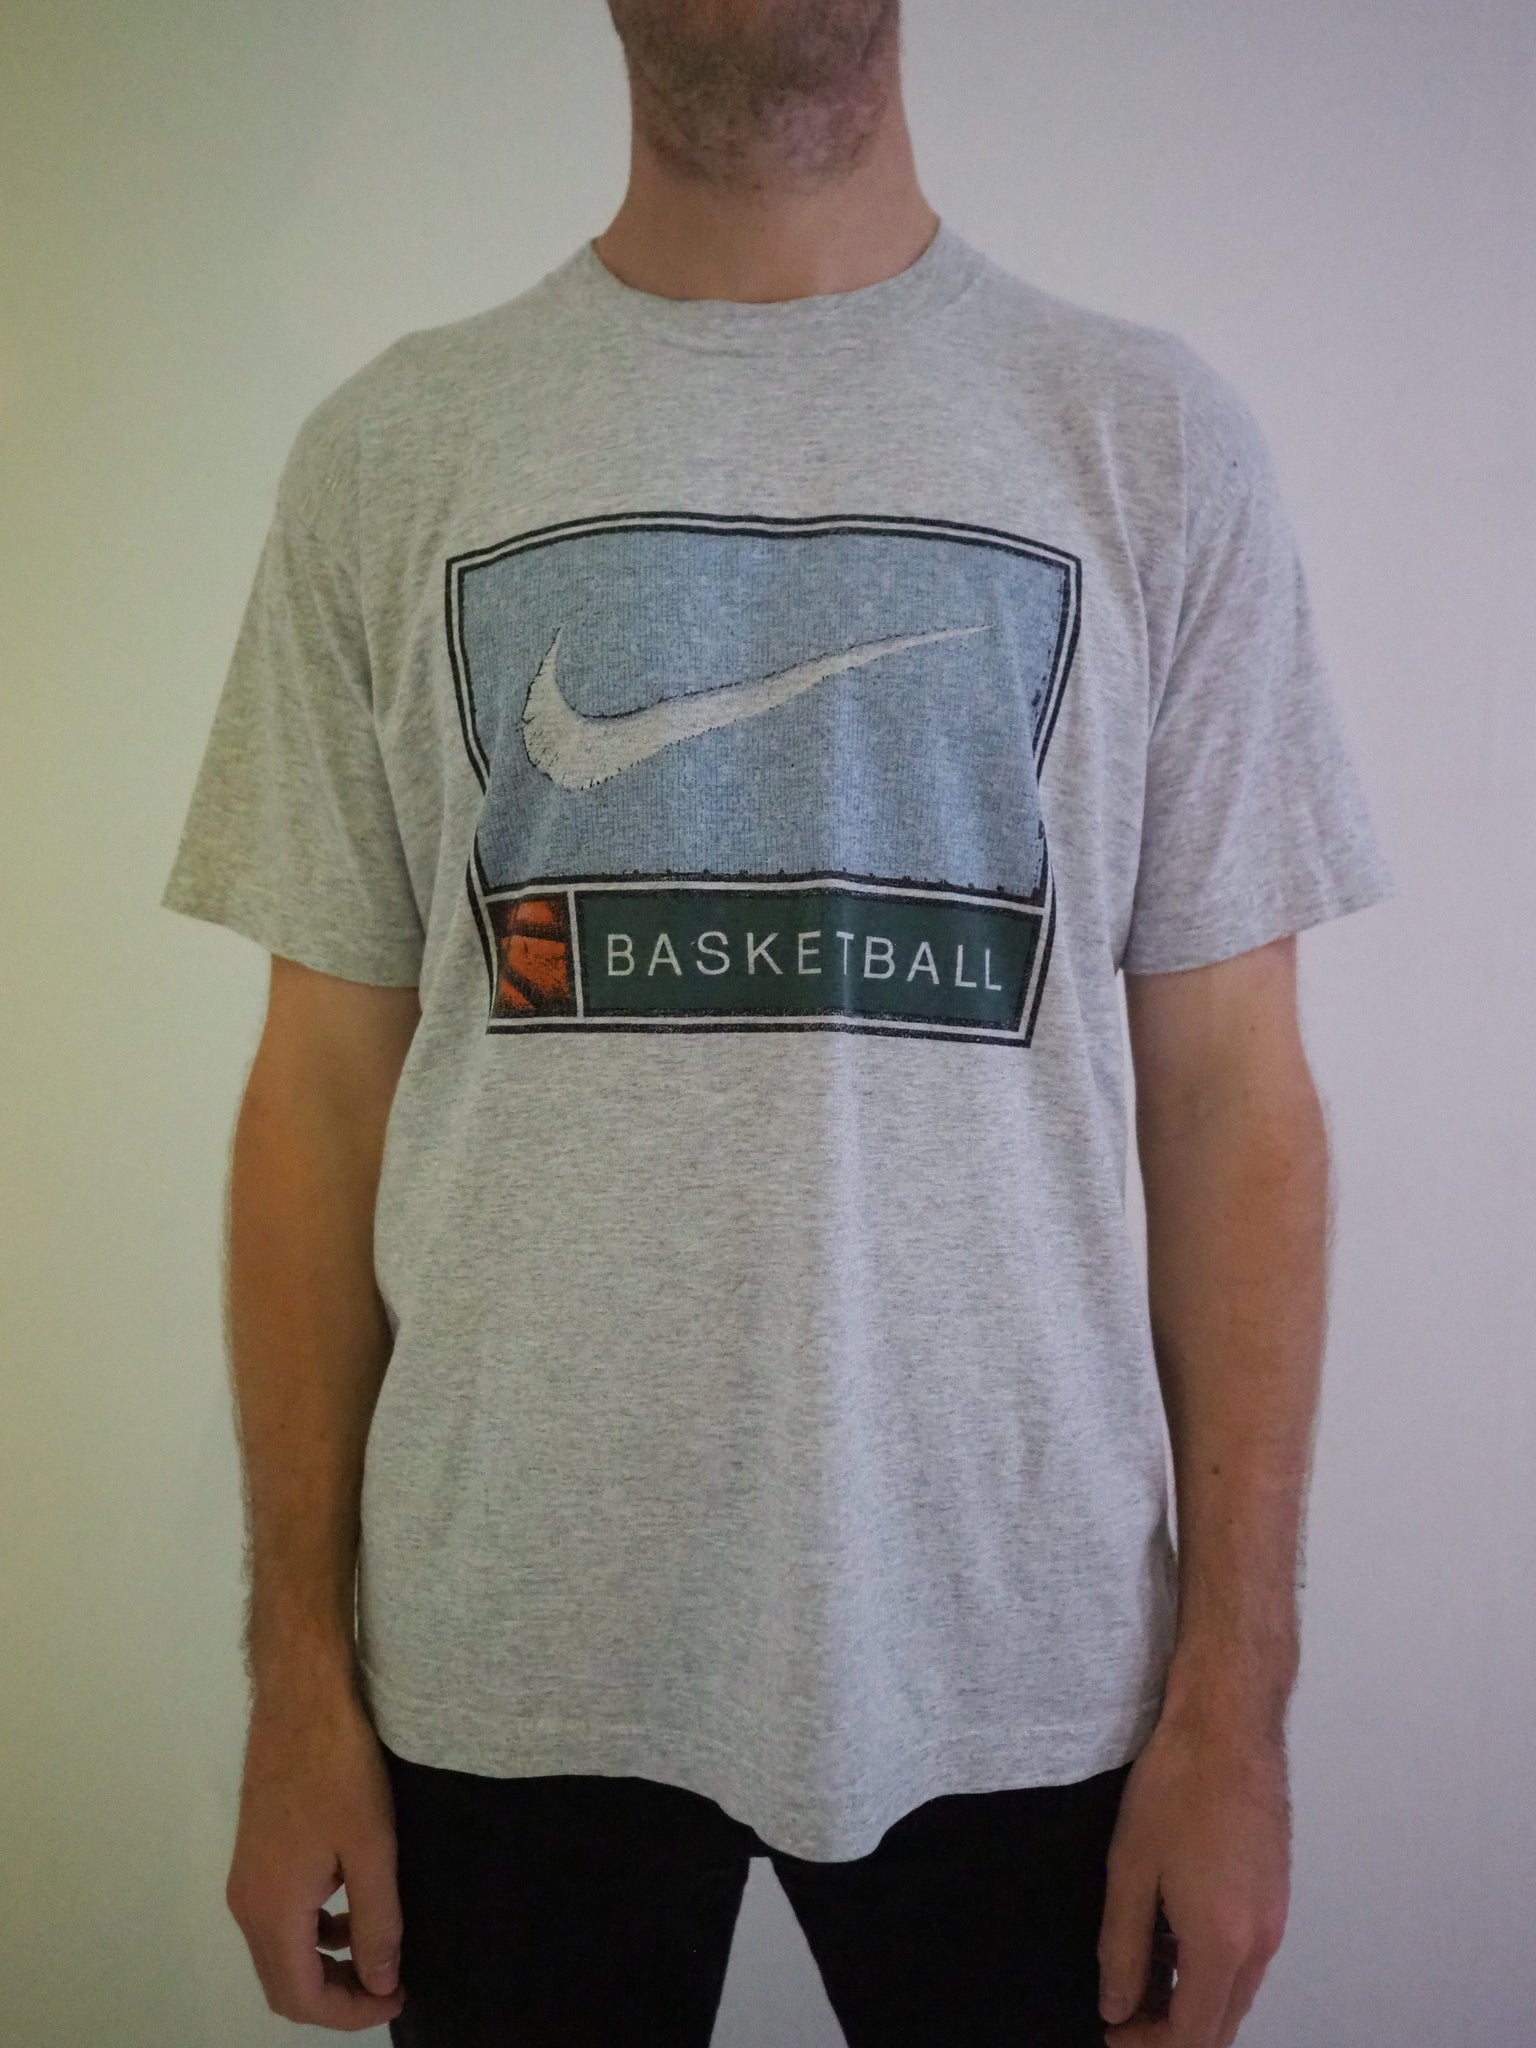 Grey Nike Vintage Basketball T-shirt with Blue Graphic